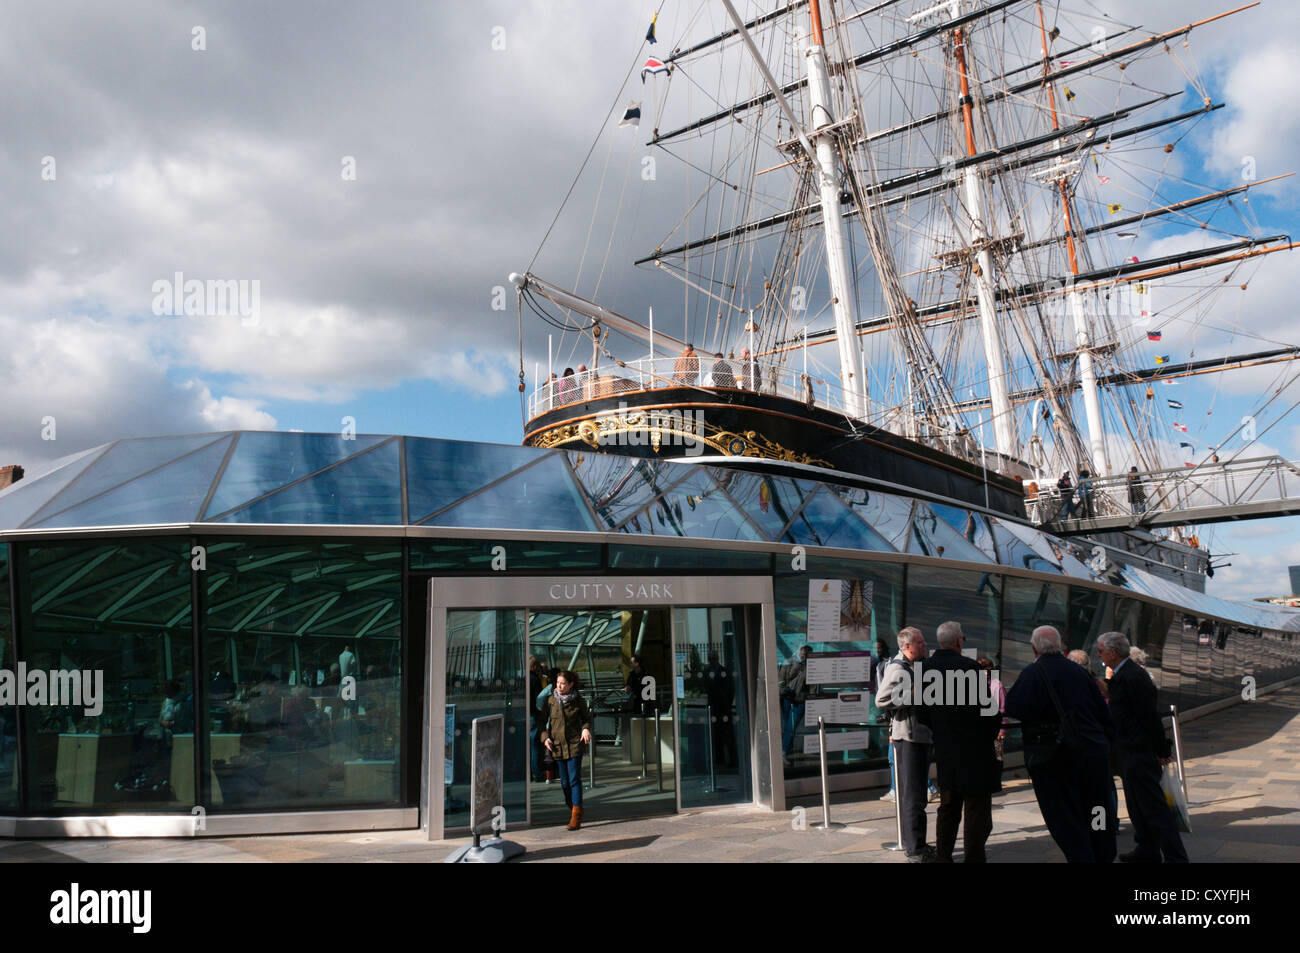 The restored Cutty Sark and museum in Greenwich, London. Stock Photo